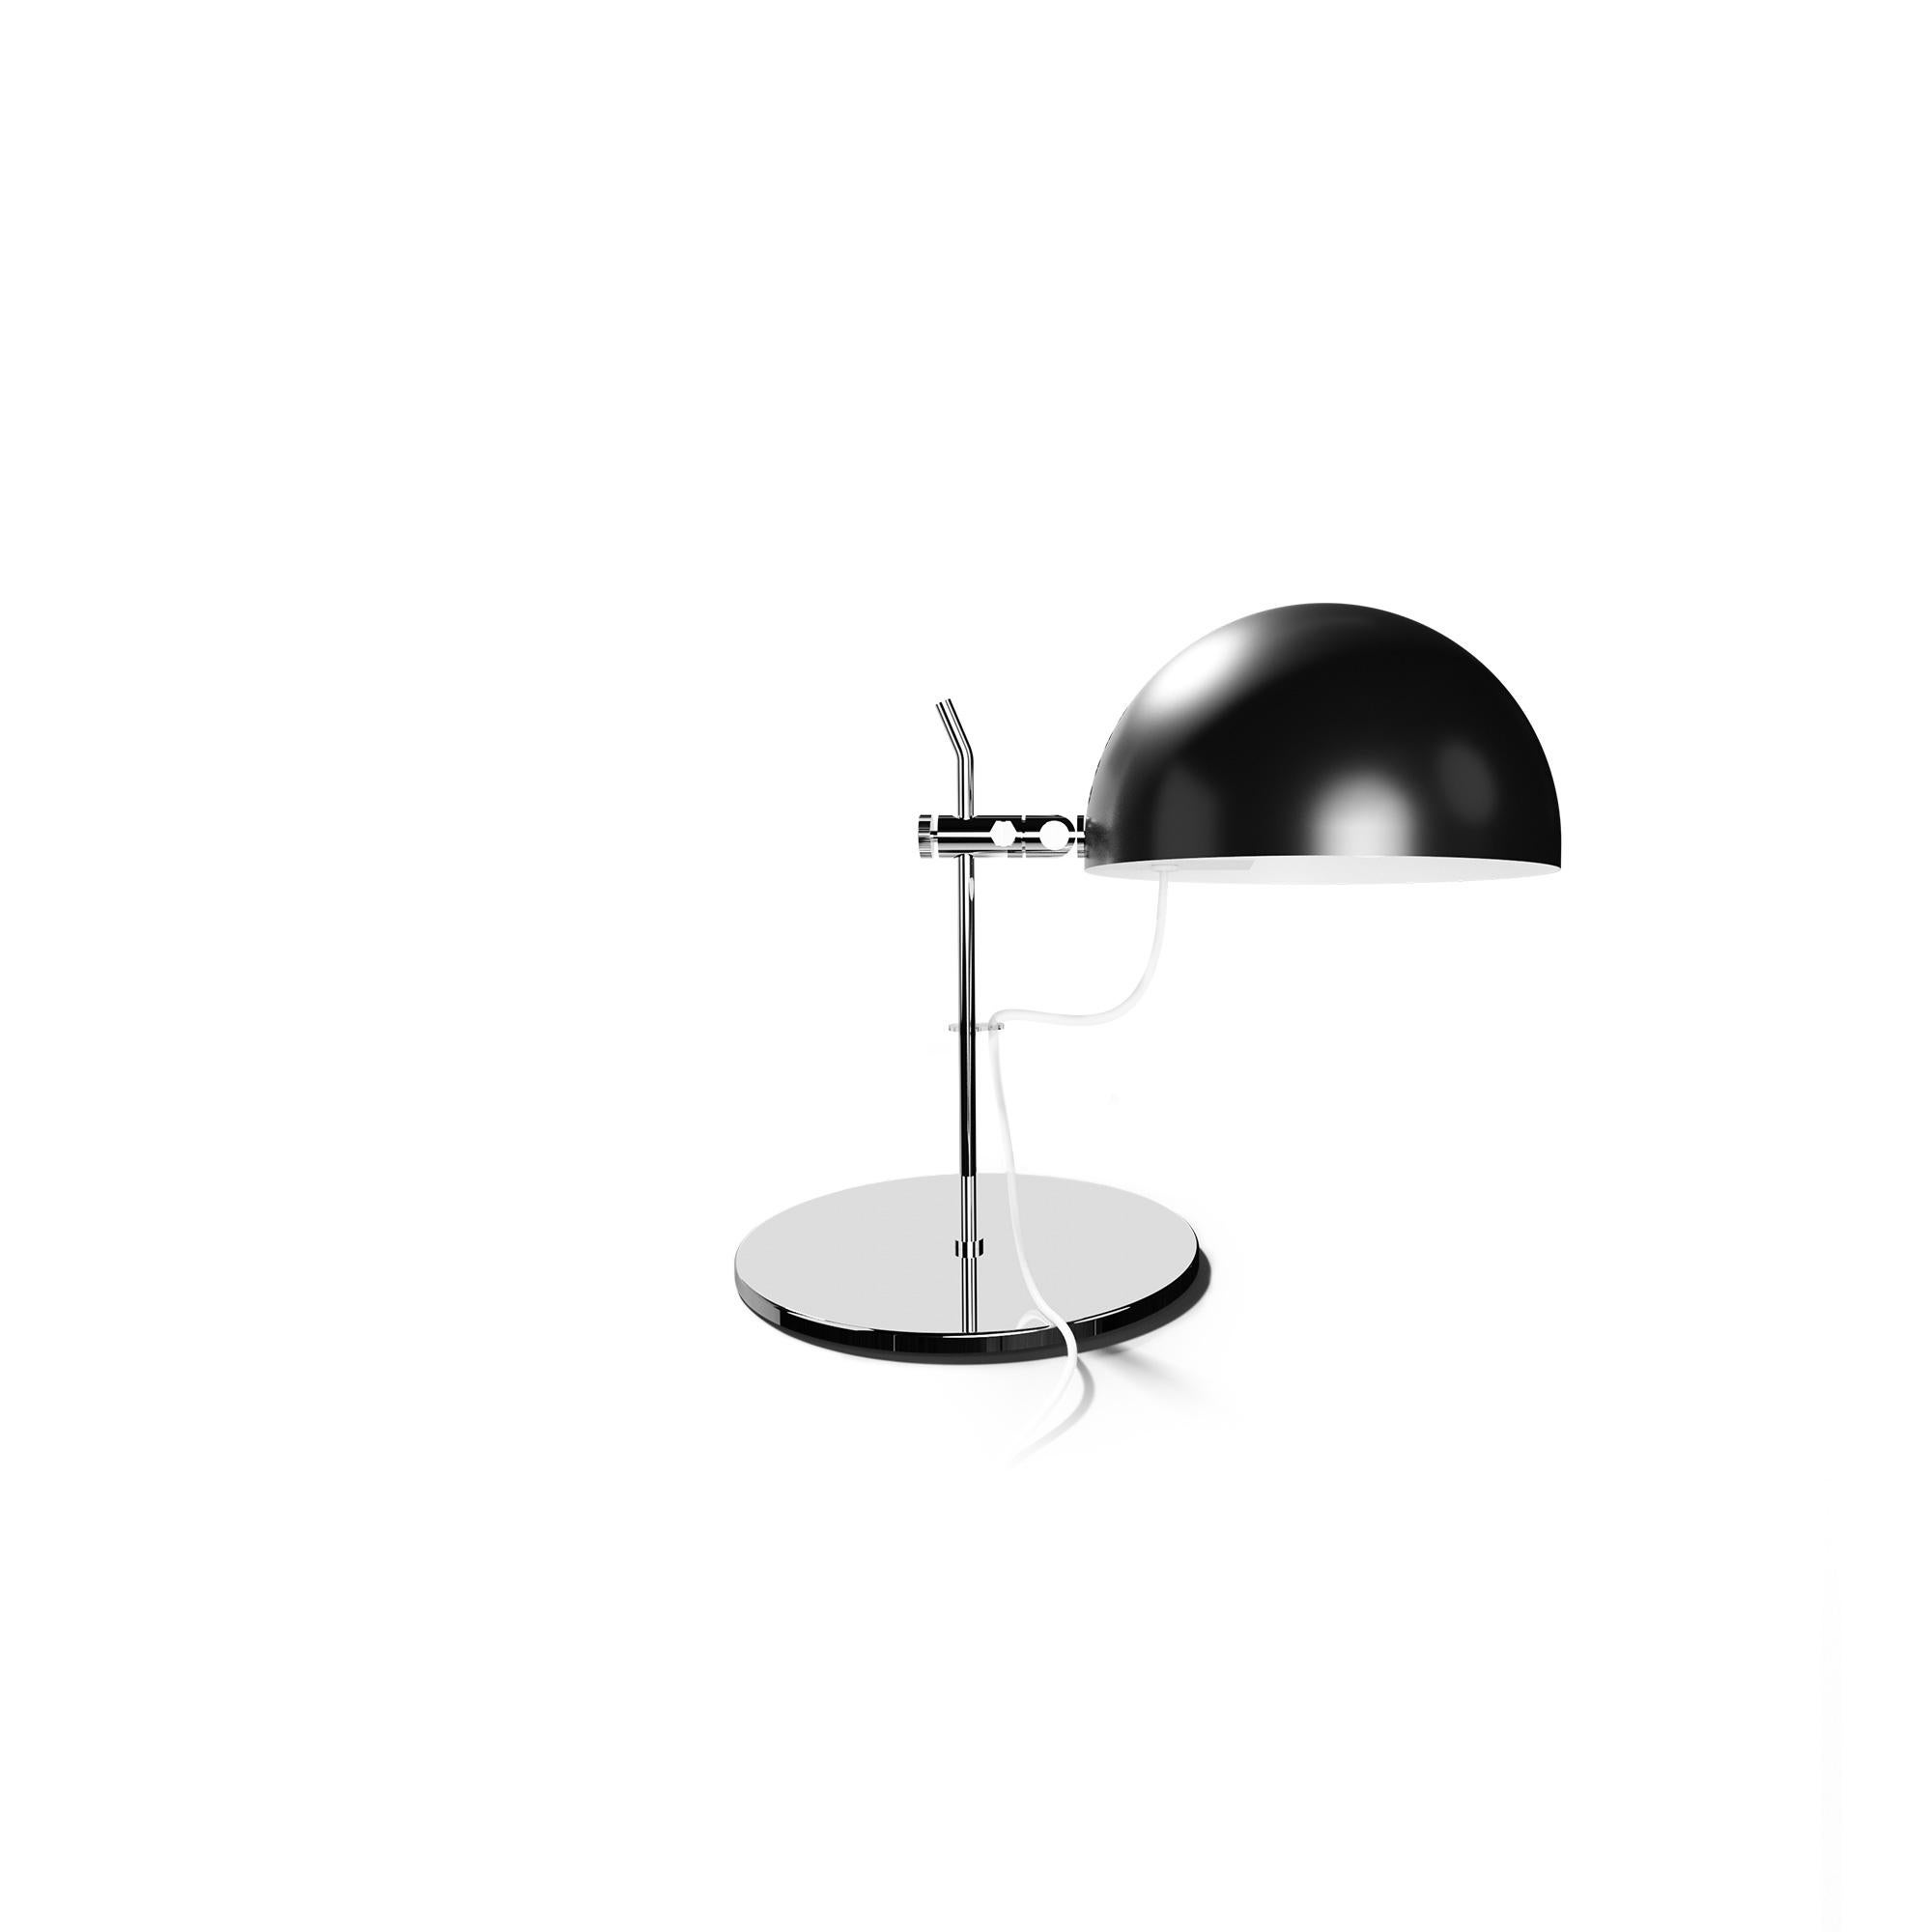 Alain Richard 'A23' Metal and Marble Floor Lamp for Disderot in Orange For Sale 5